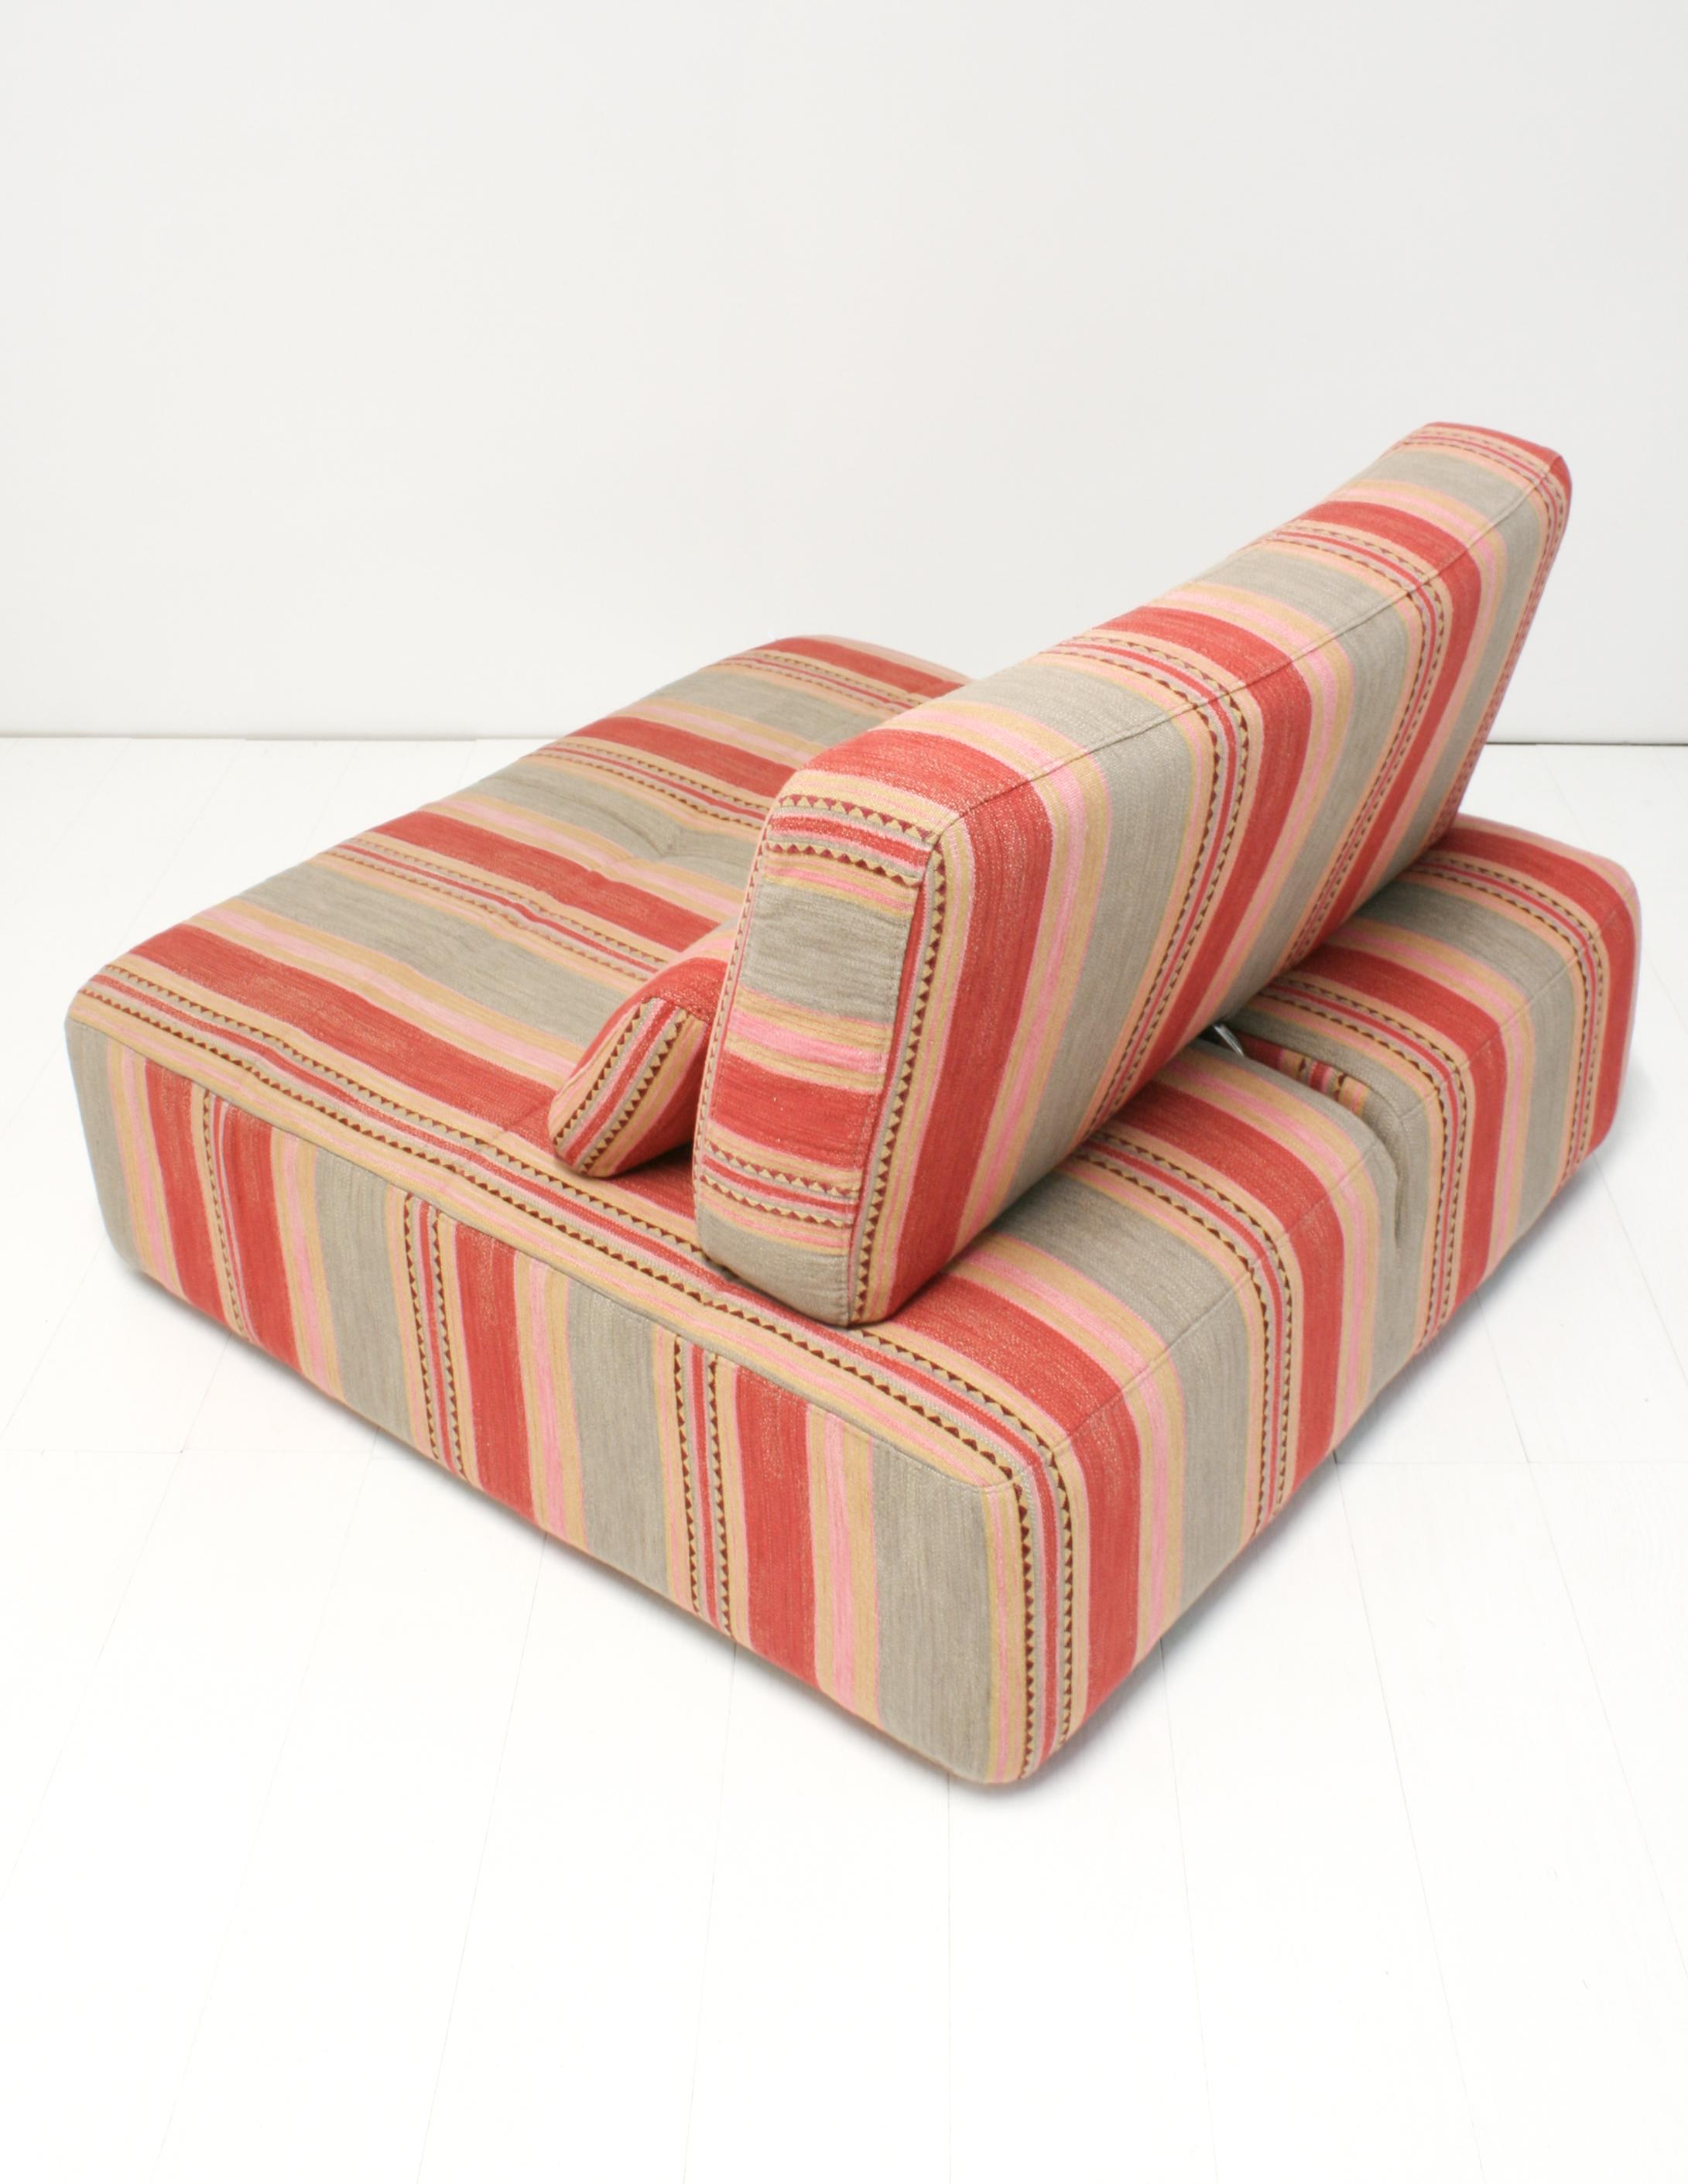 Modular Parcours Voyage Immobile Fabric Sofa by Sacha Lakic for Roche Bobois 1